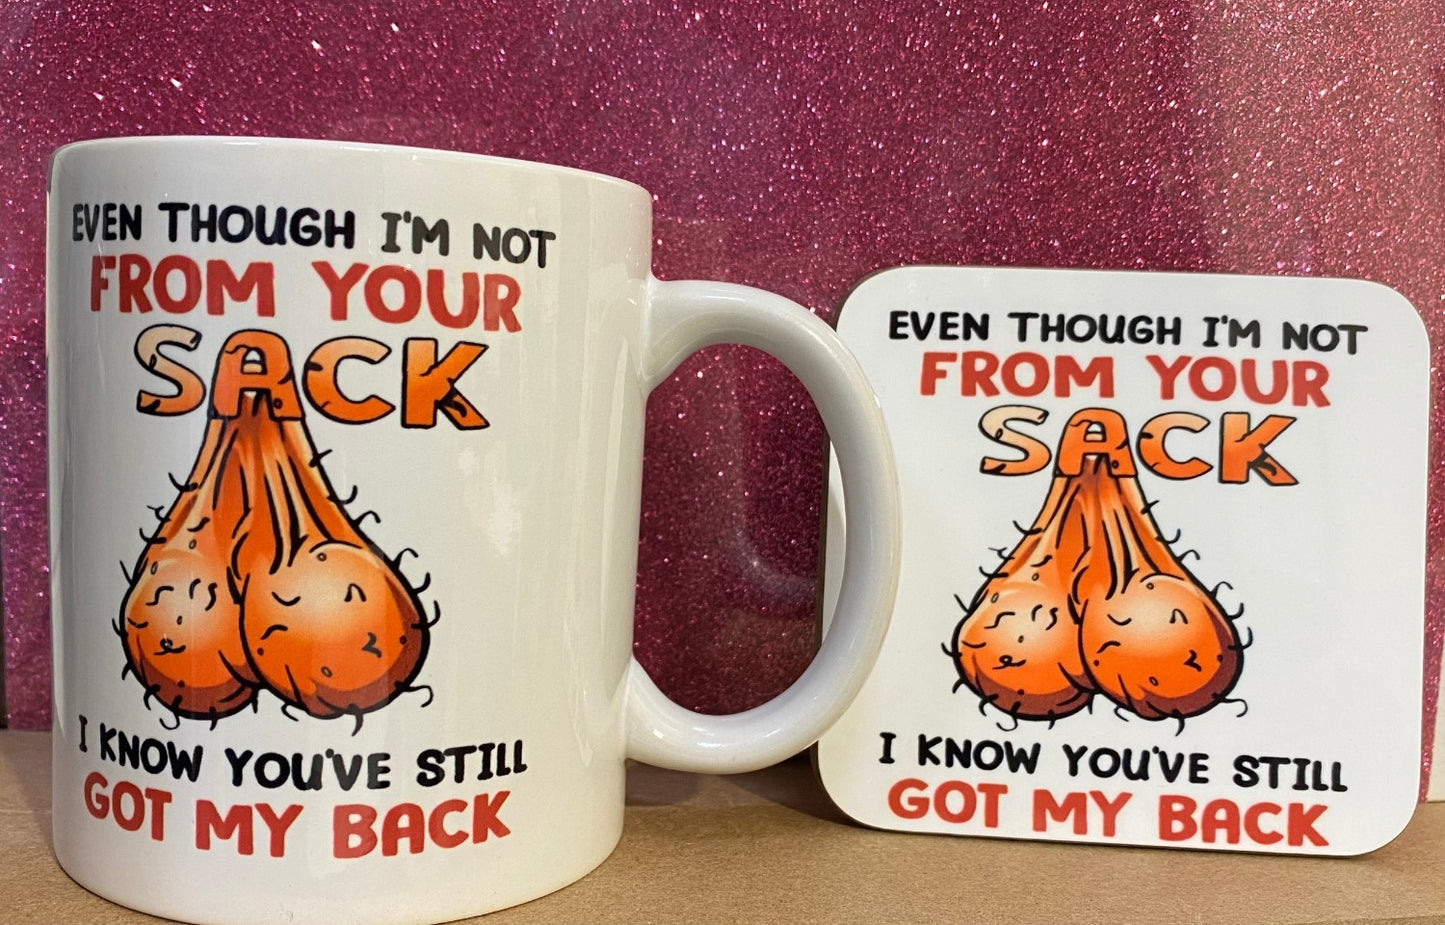 Even Though I'm NOT from Your Sack I Know You've GOT My Back Happy Father's Day Novelty Mug for Stepdad